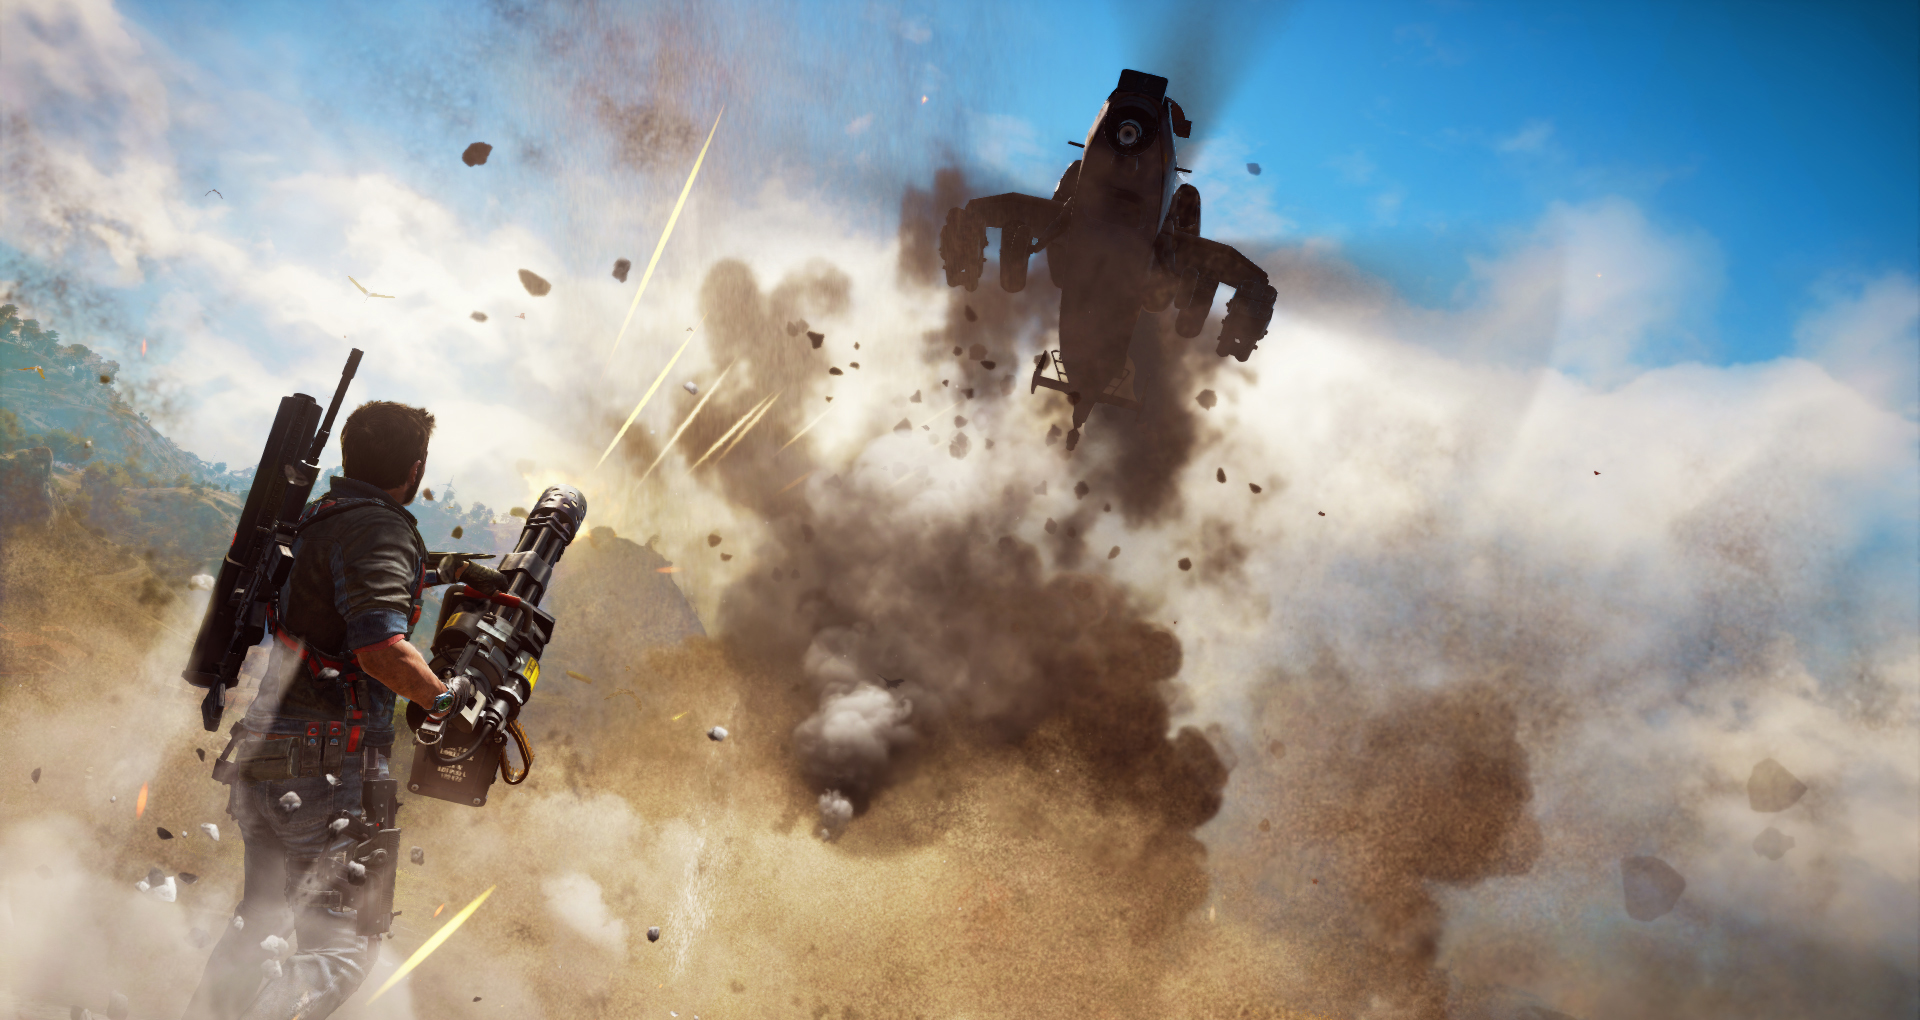 just cause 3 for pc free